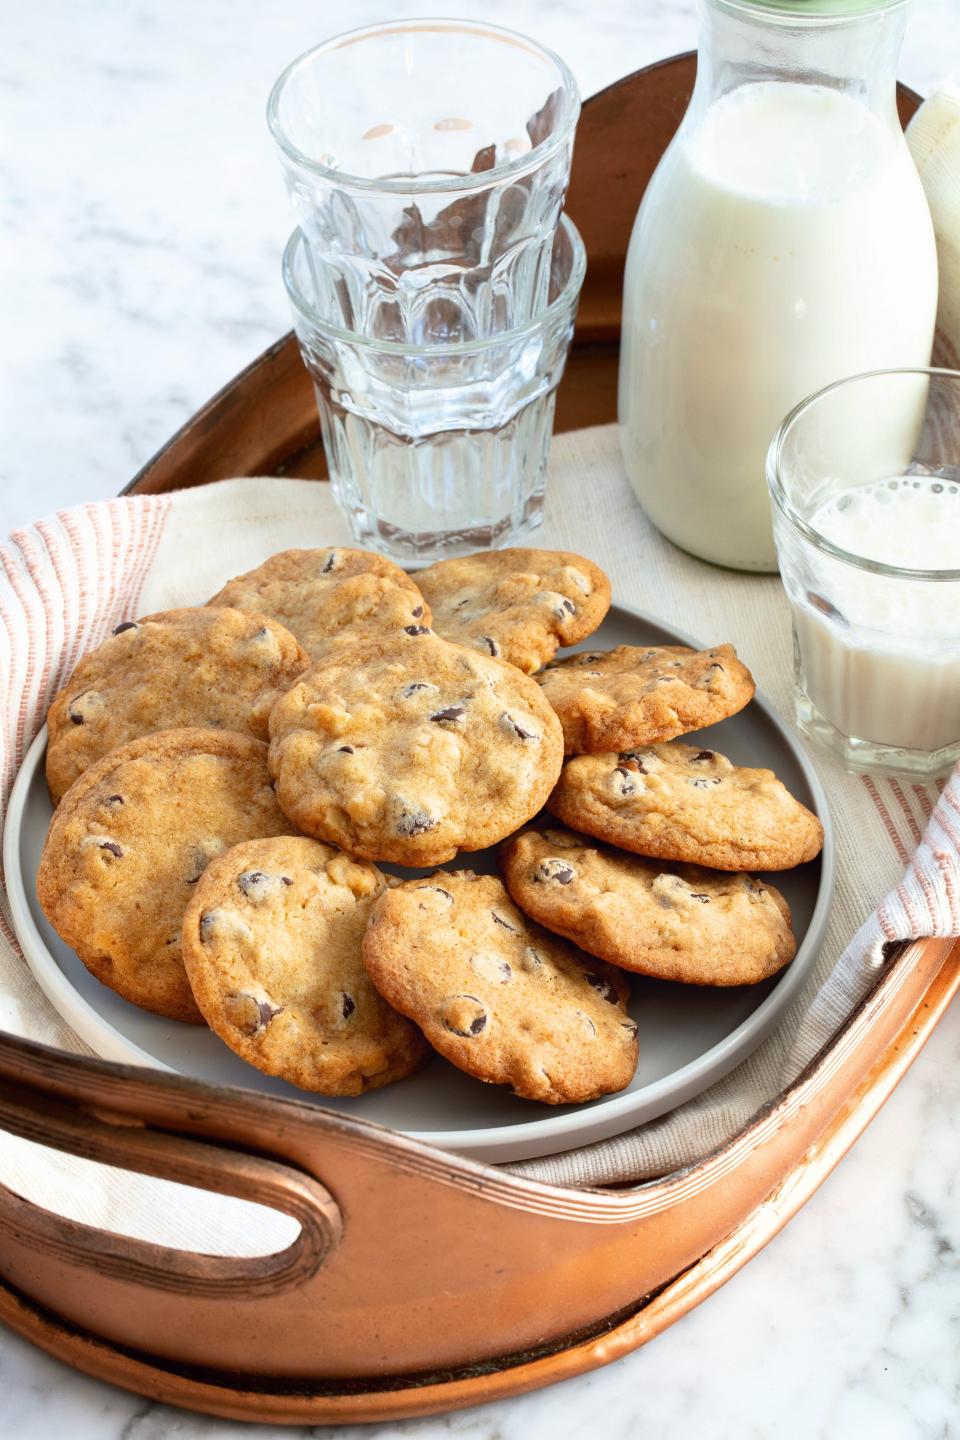 Rose’s Dream Chocolate Chip Cookies from “The Cookie Bible” by Rose Levy Beranbaum.